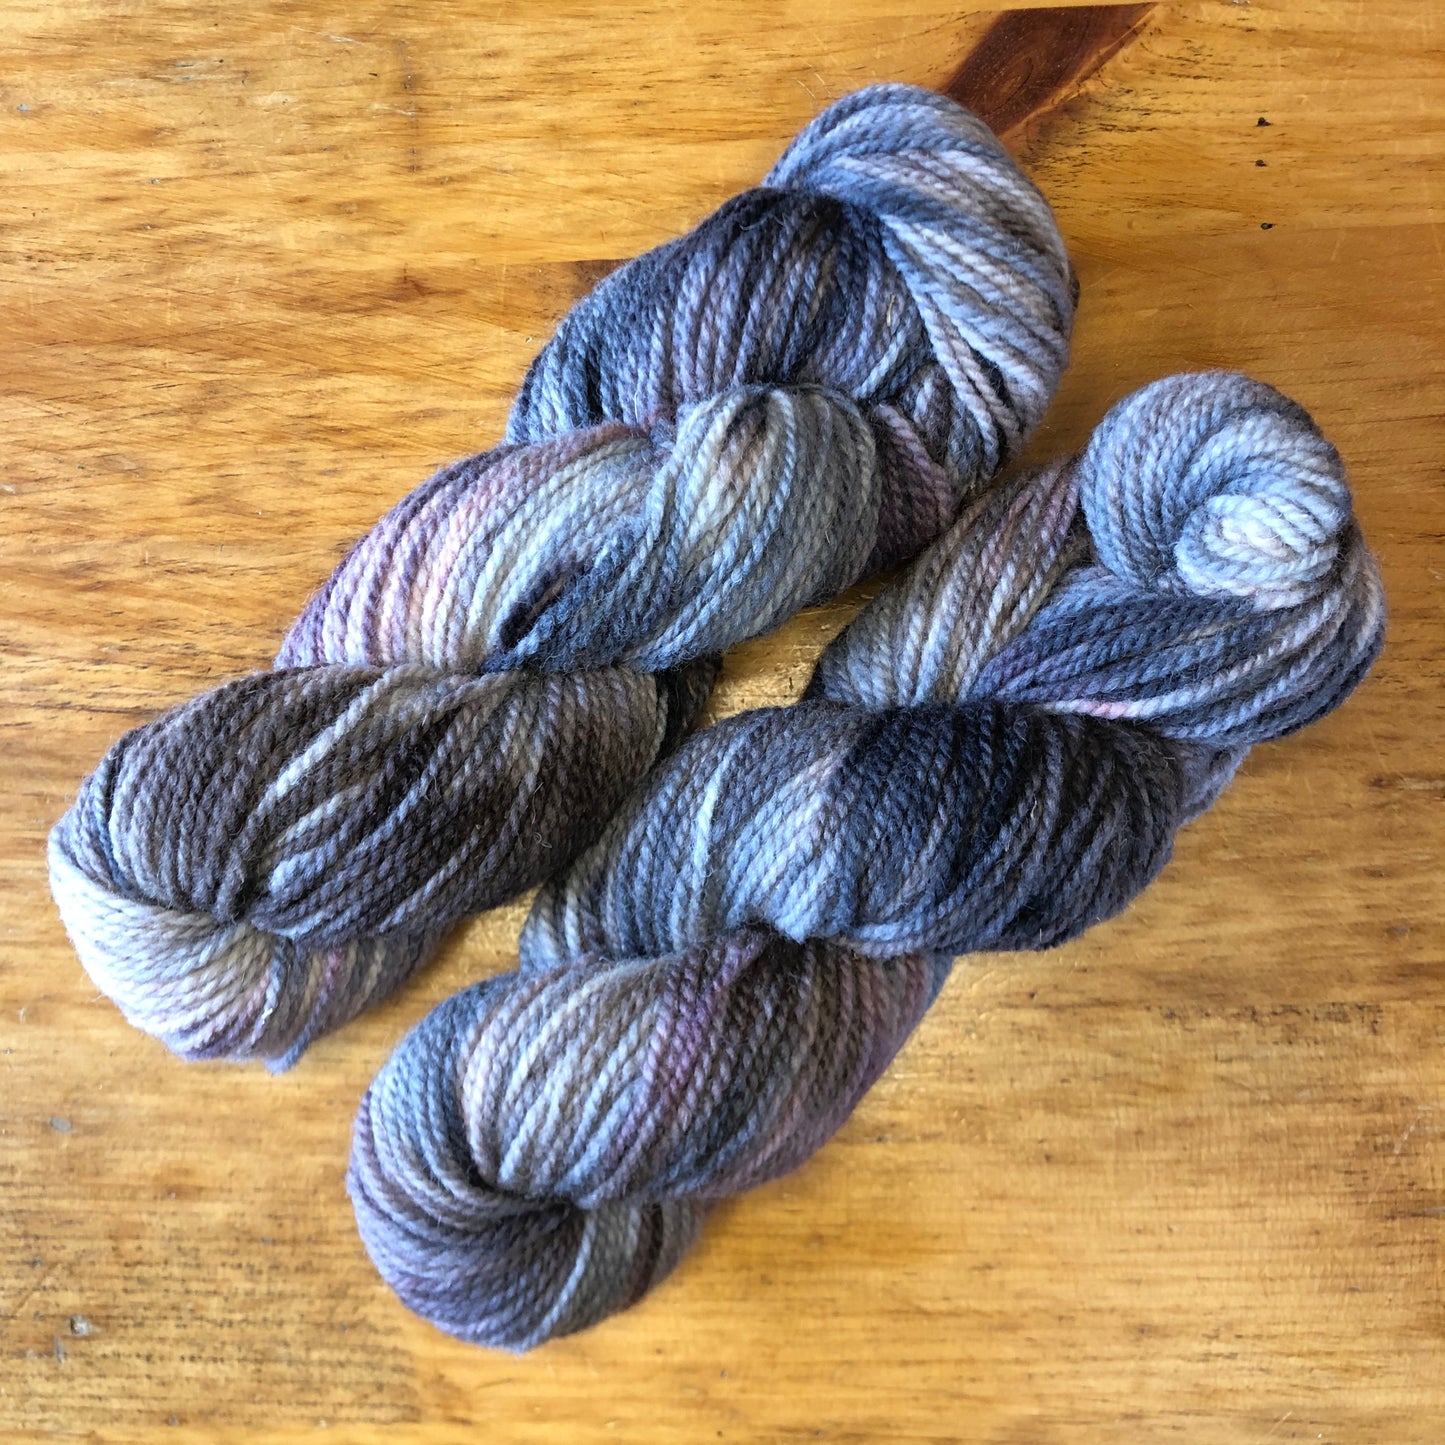 Worsted Weight (4) Yarn, 100% Wool, Hand Dyed "Fieldstone" Colourway